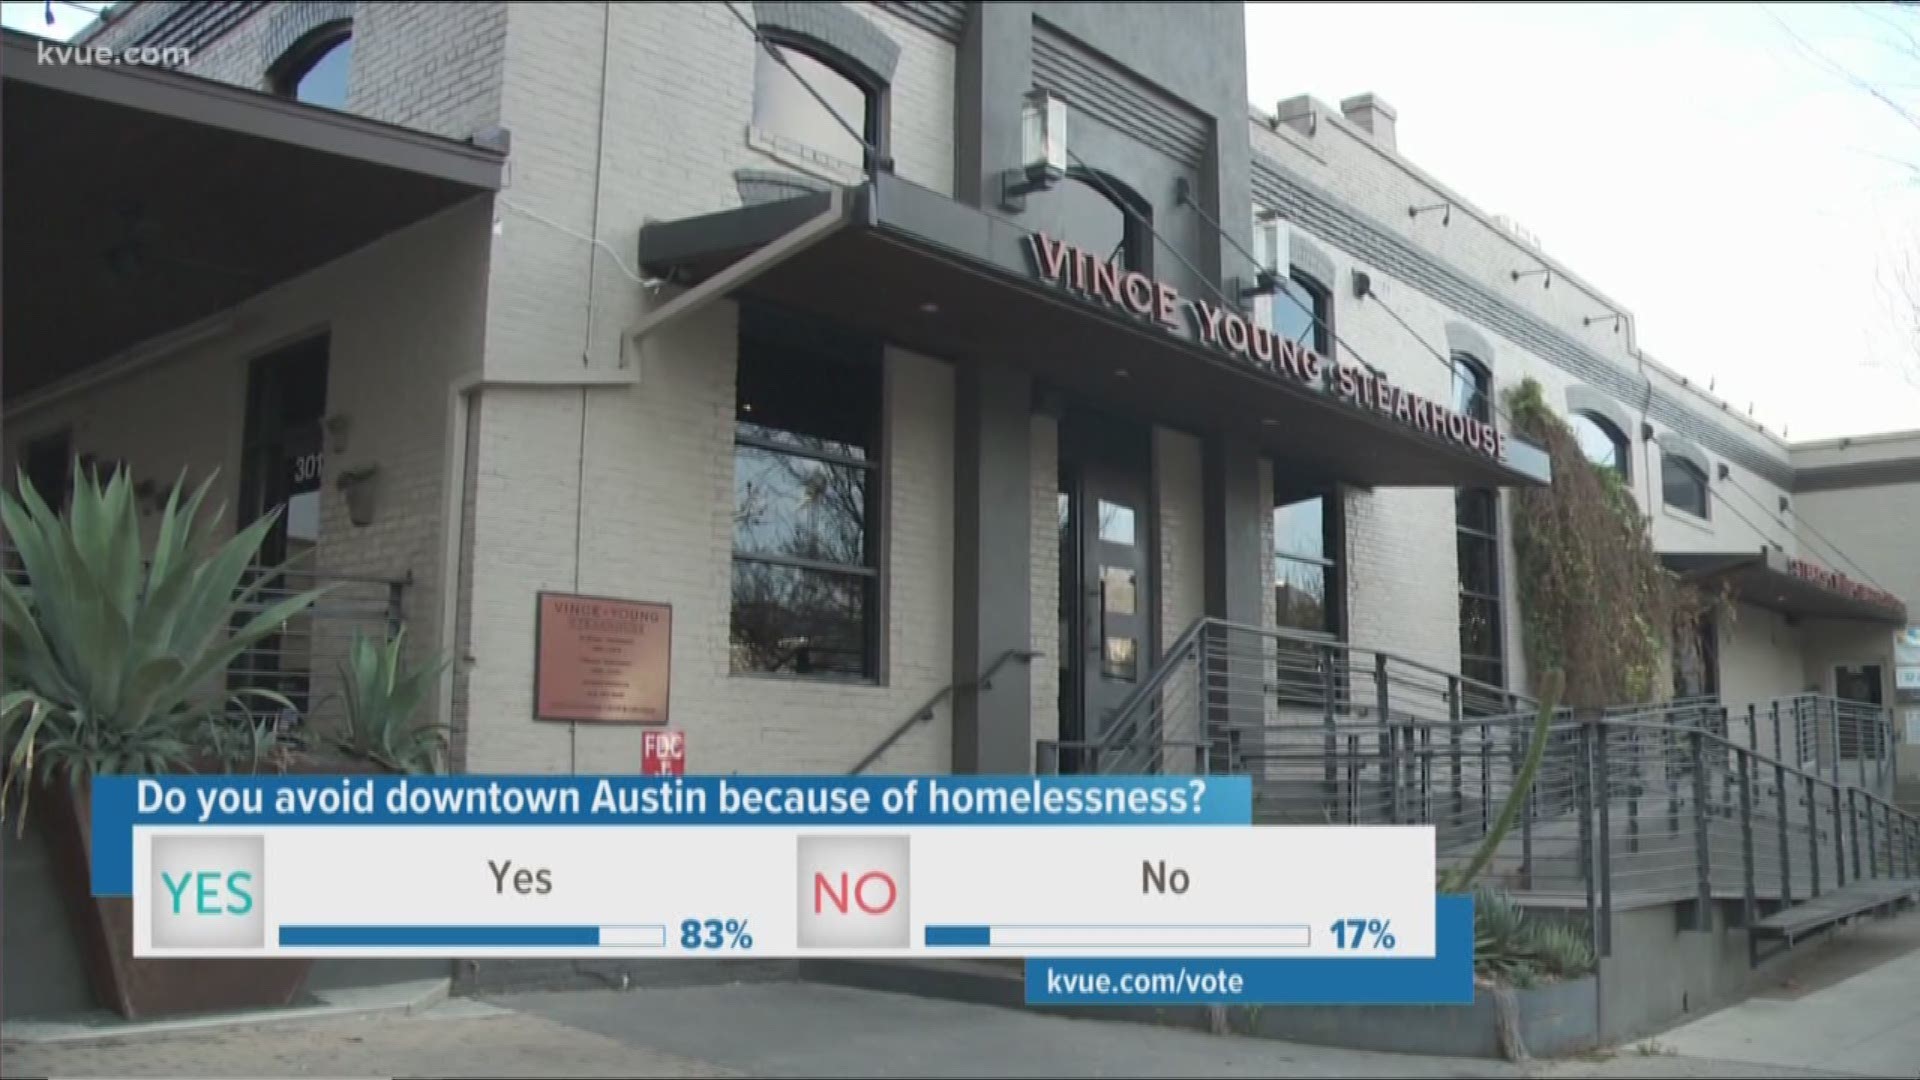 The owner of Vince Young Steakhouse said the homeless population around his restaurant has gotten out of hand.